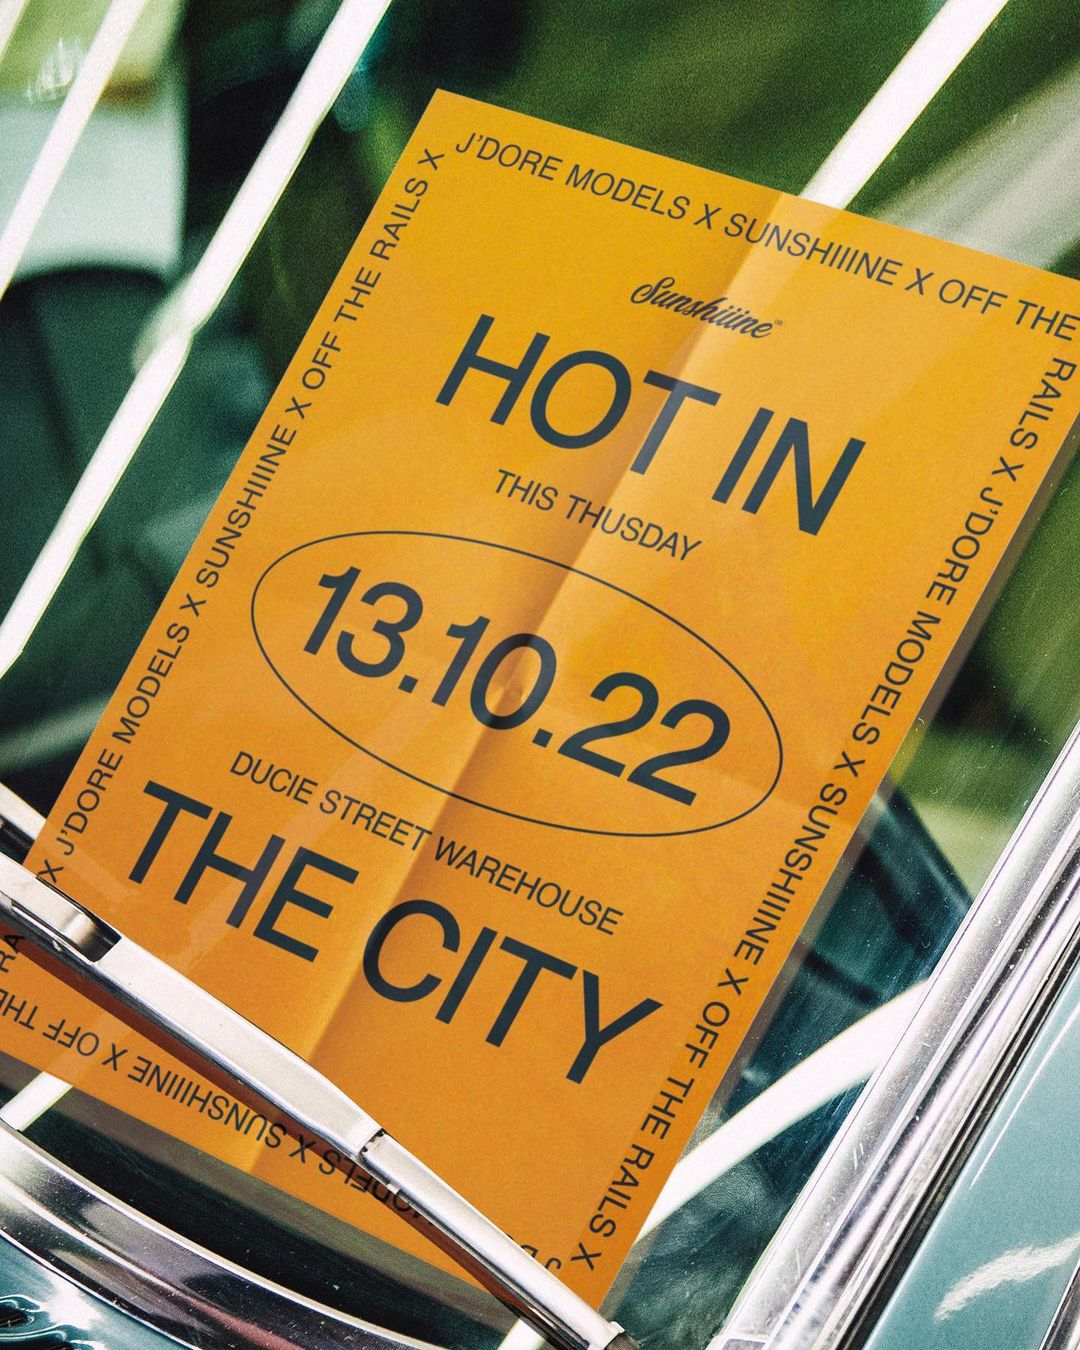 HOT IN THE CITY EVENT